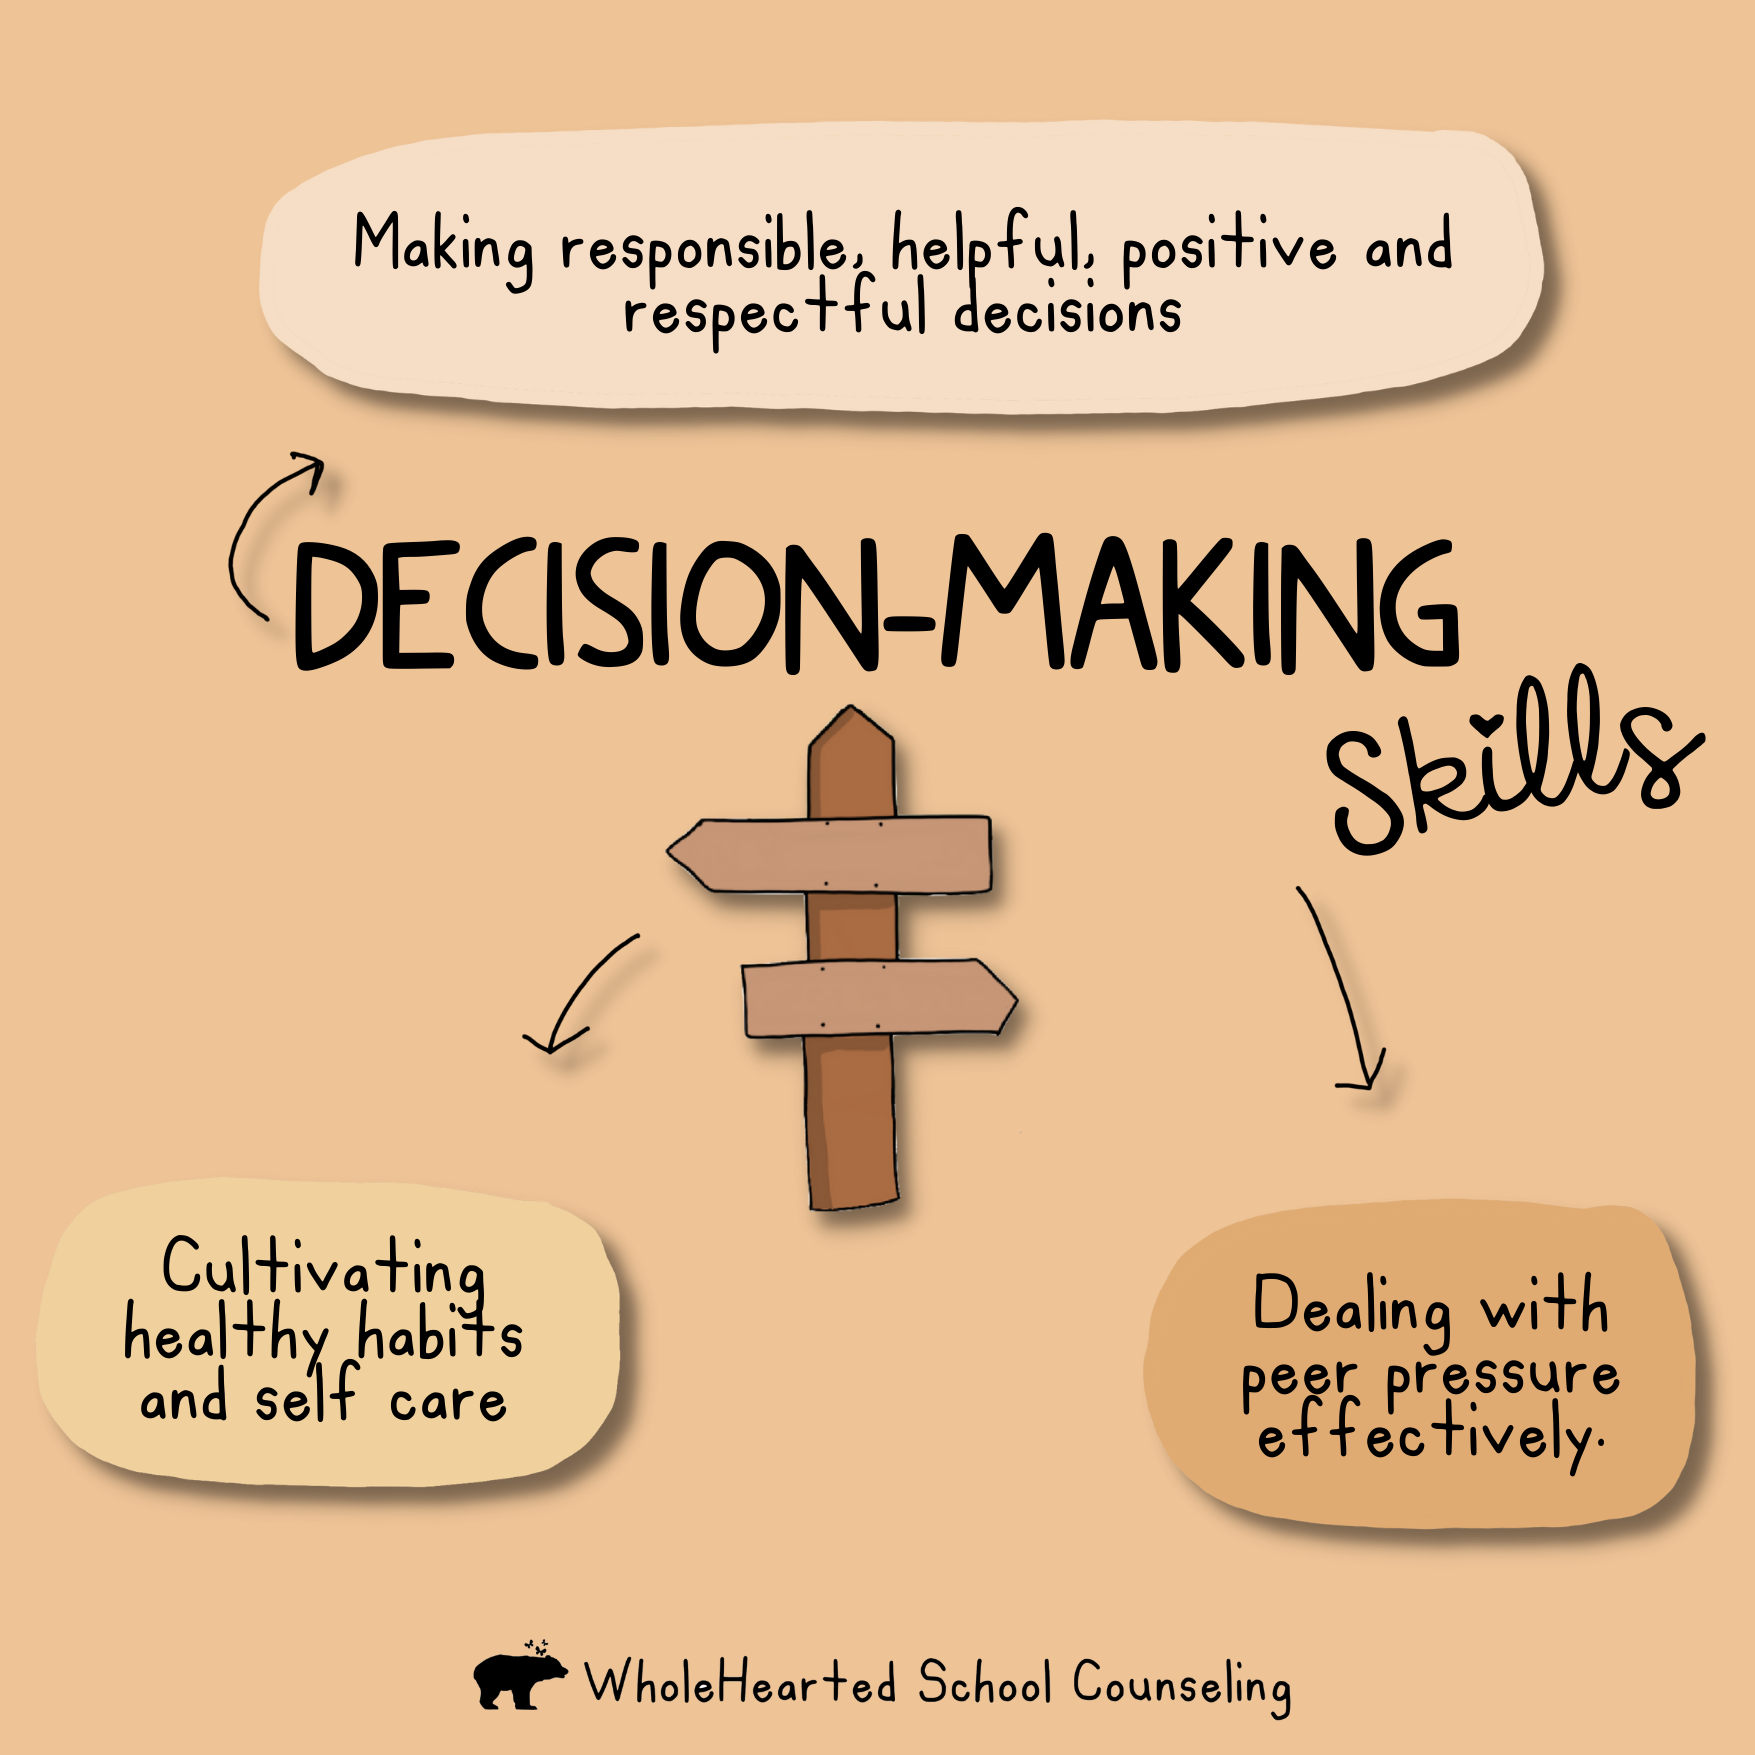 List of different decision making skills for social emotional learning with illustration of wood sign post to represent decision making.